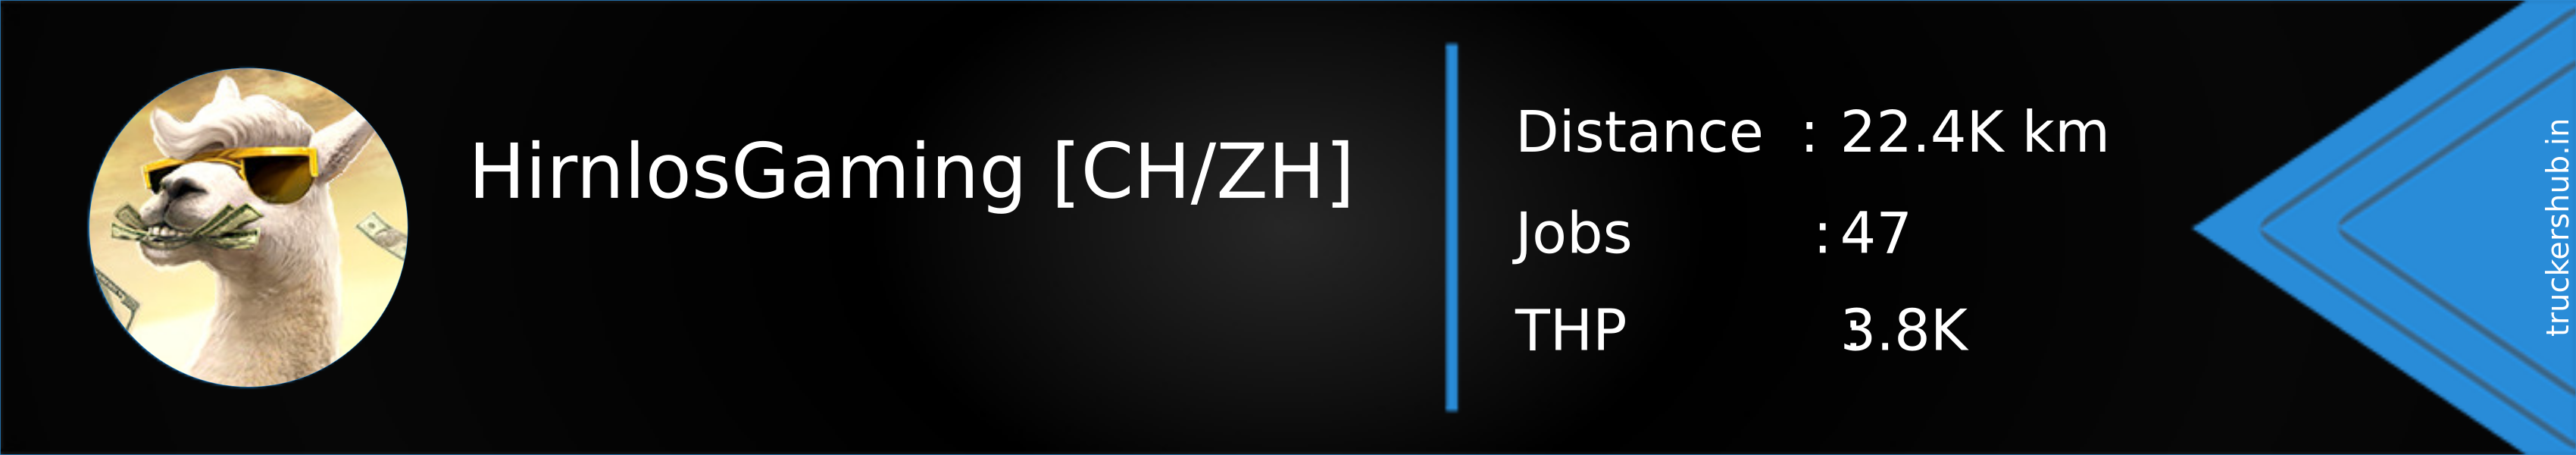 HirnlosGaming [CH/ZH] Banner